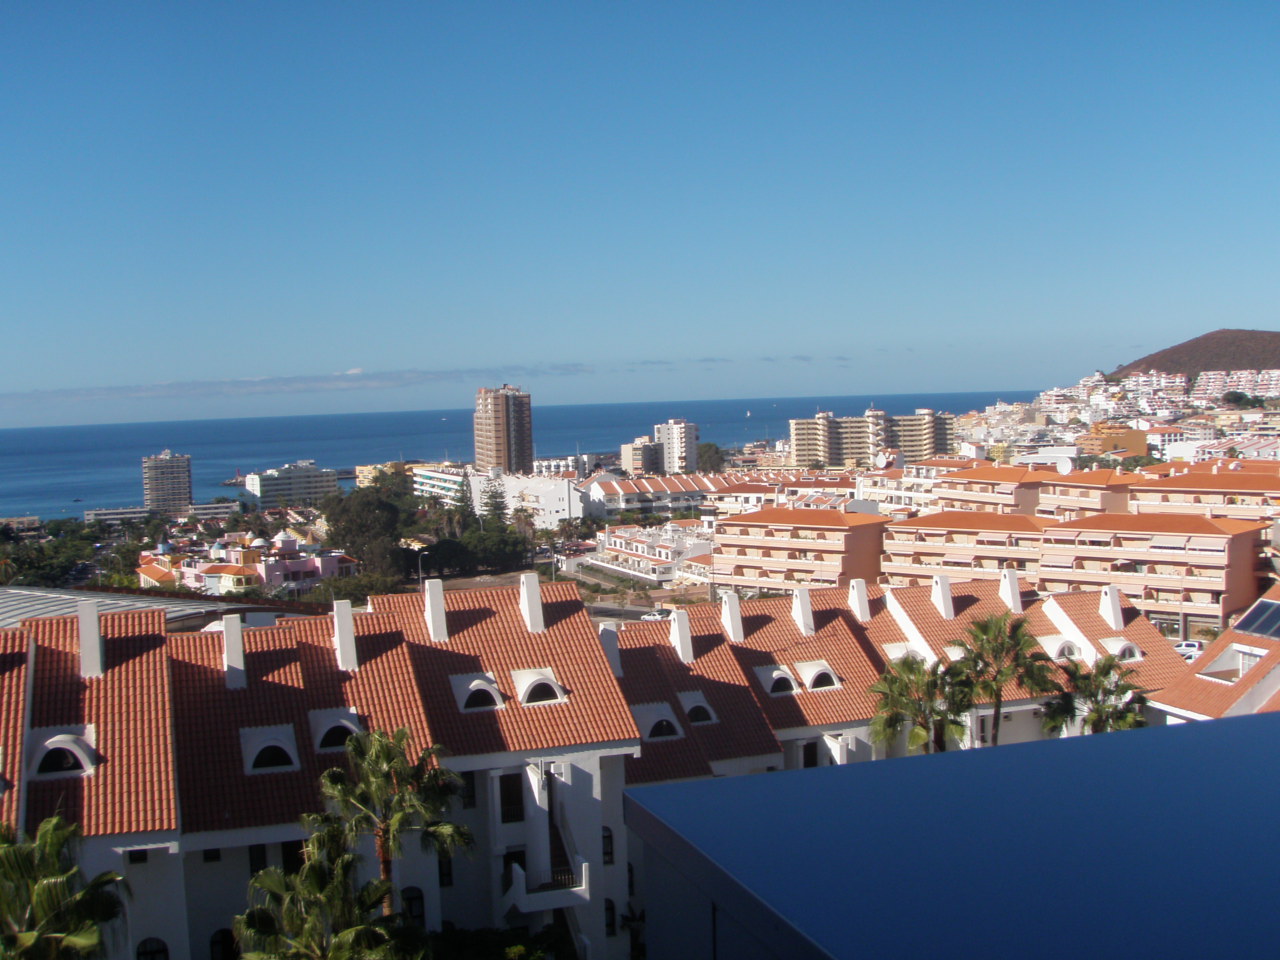 Consider a Tenerife holiday